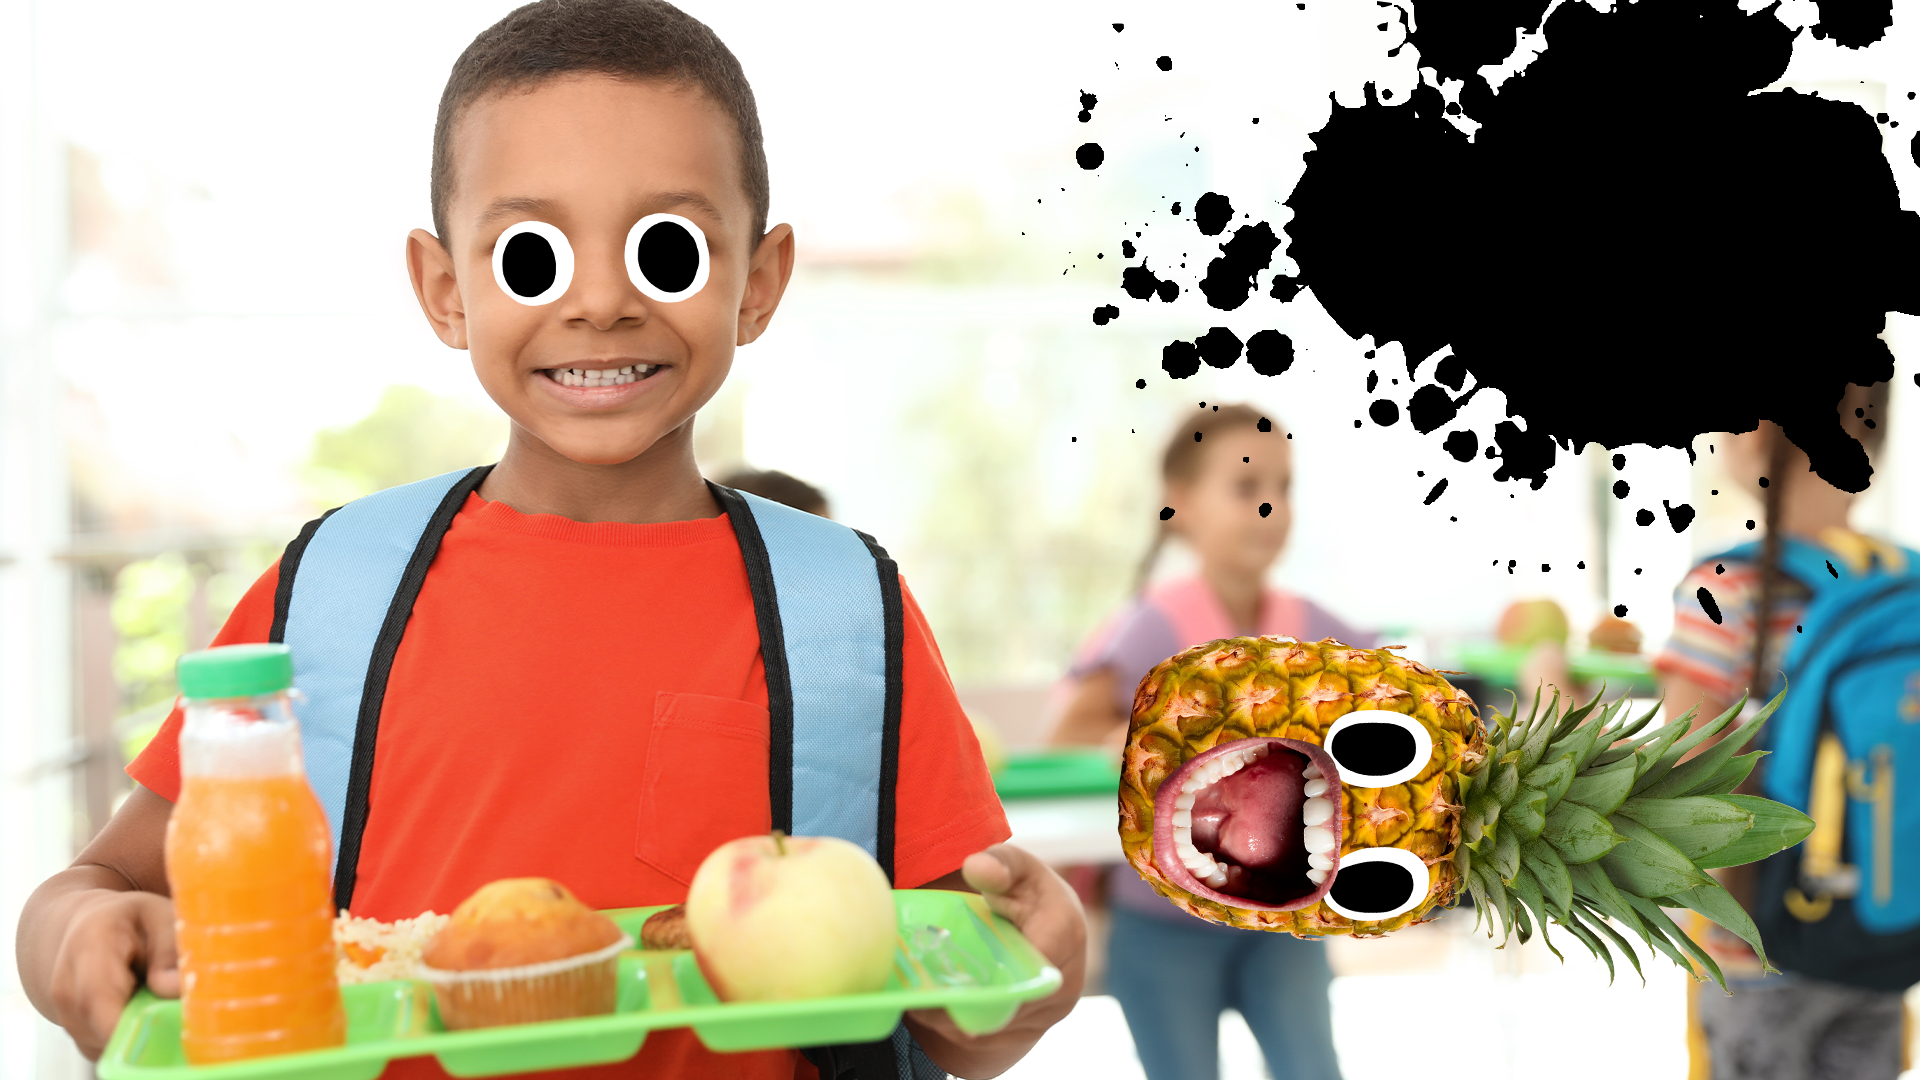 Boy with lunch tray, splat and screaming pineapple 